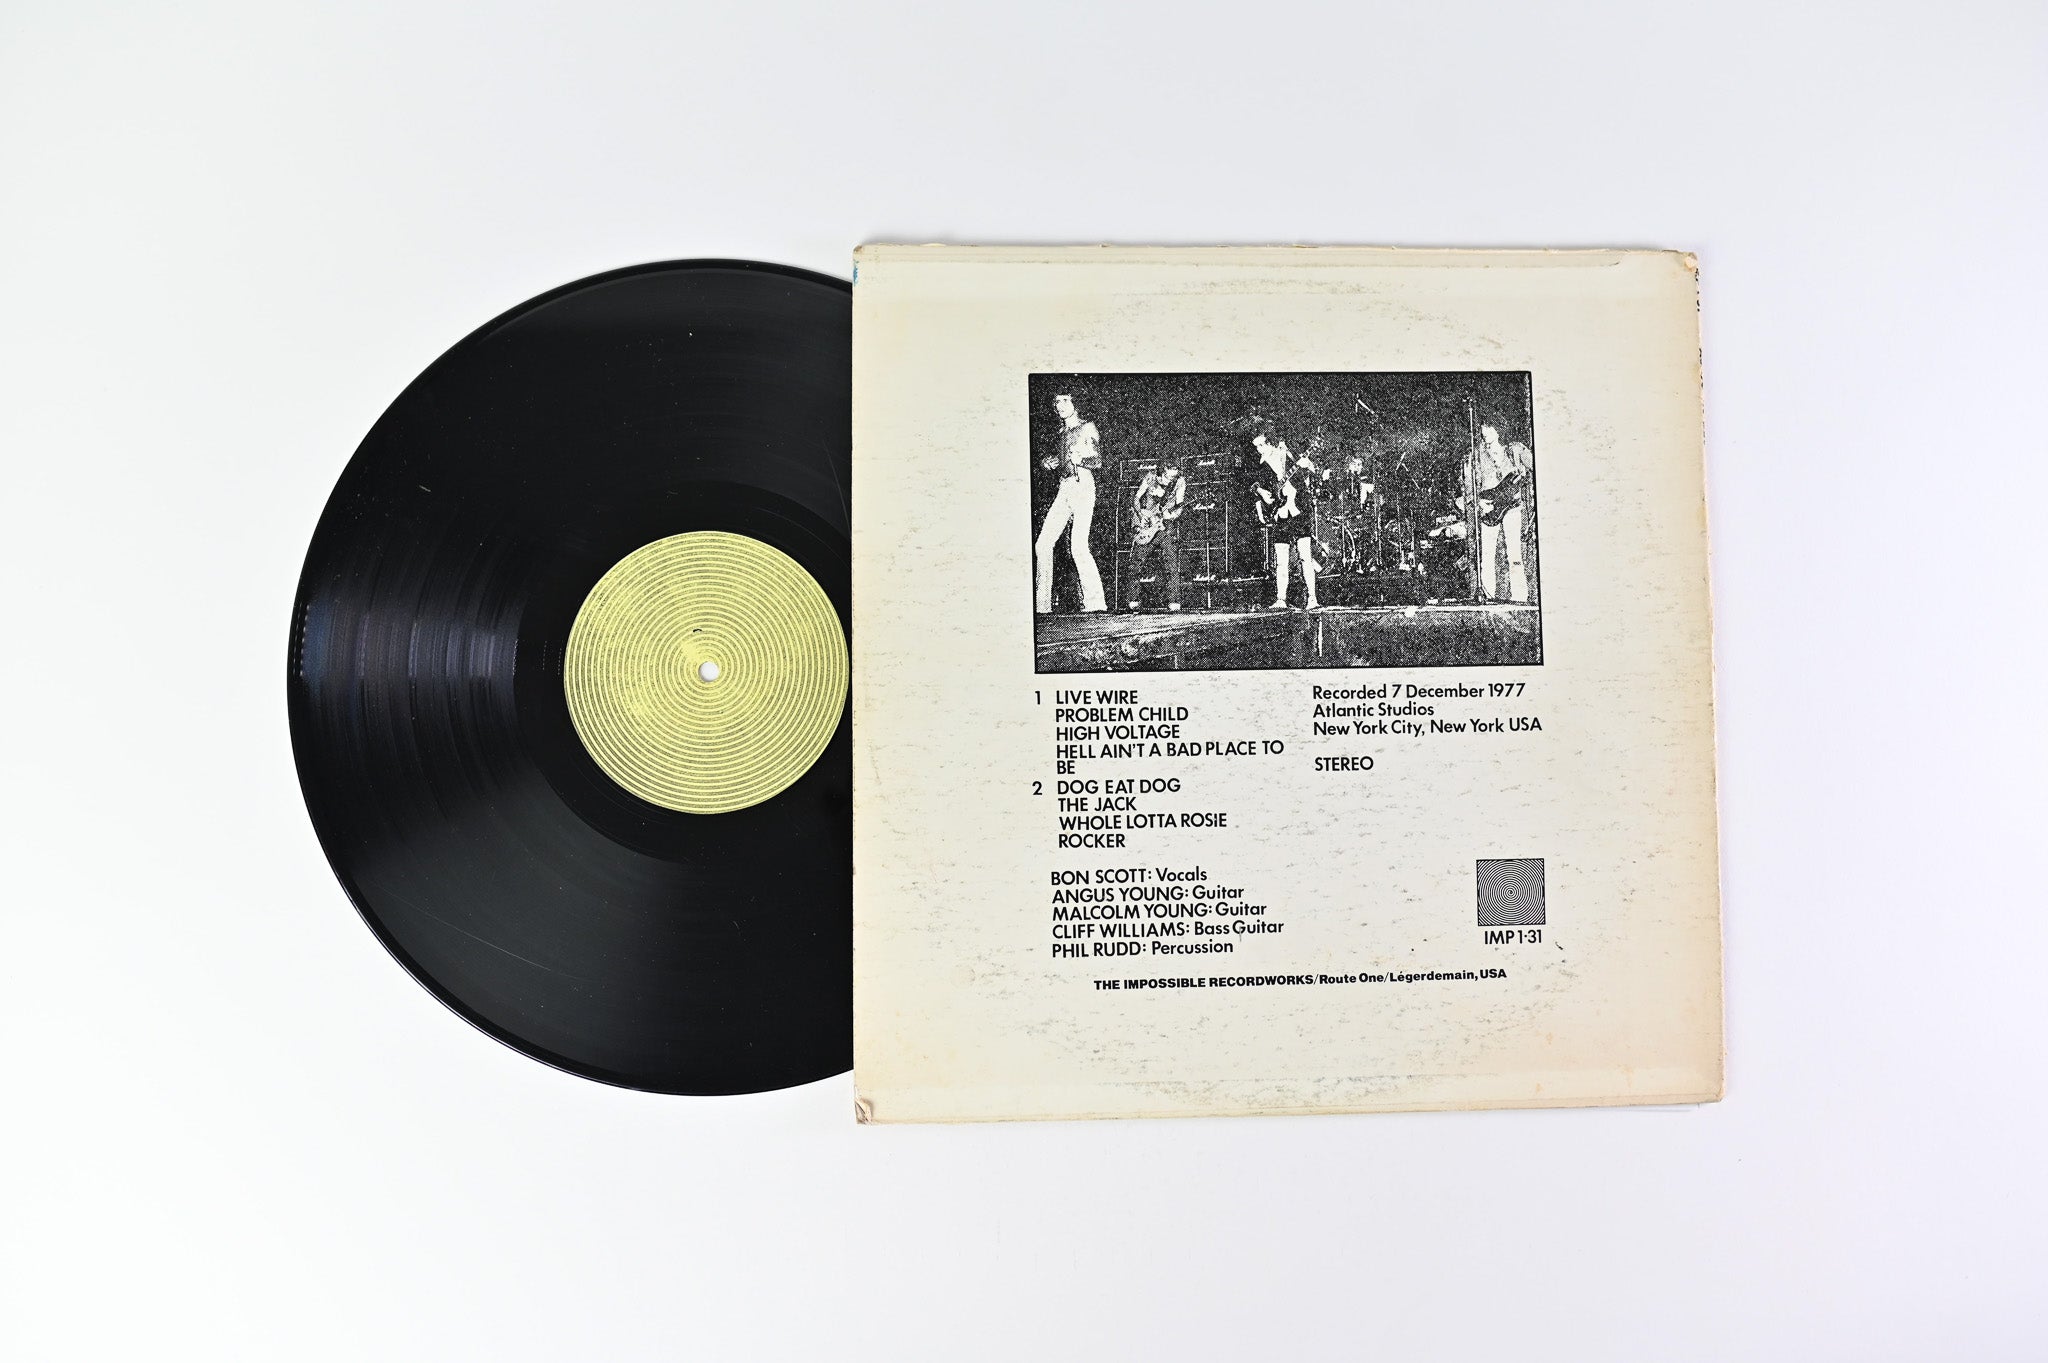 AC/DC - 110/220 on Impossible Recordworks Unofficial